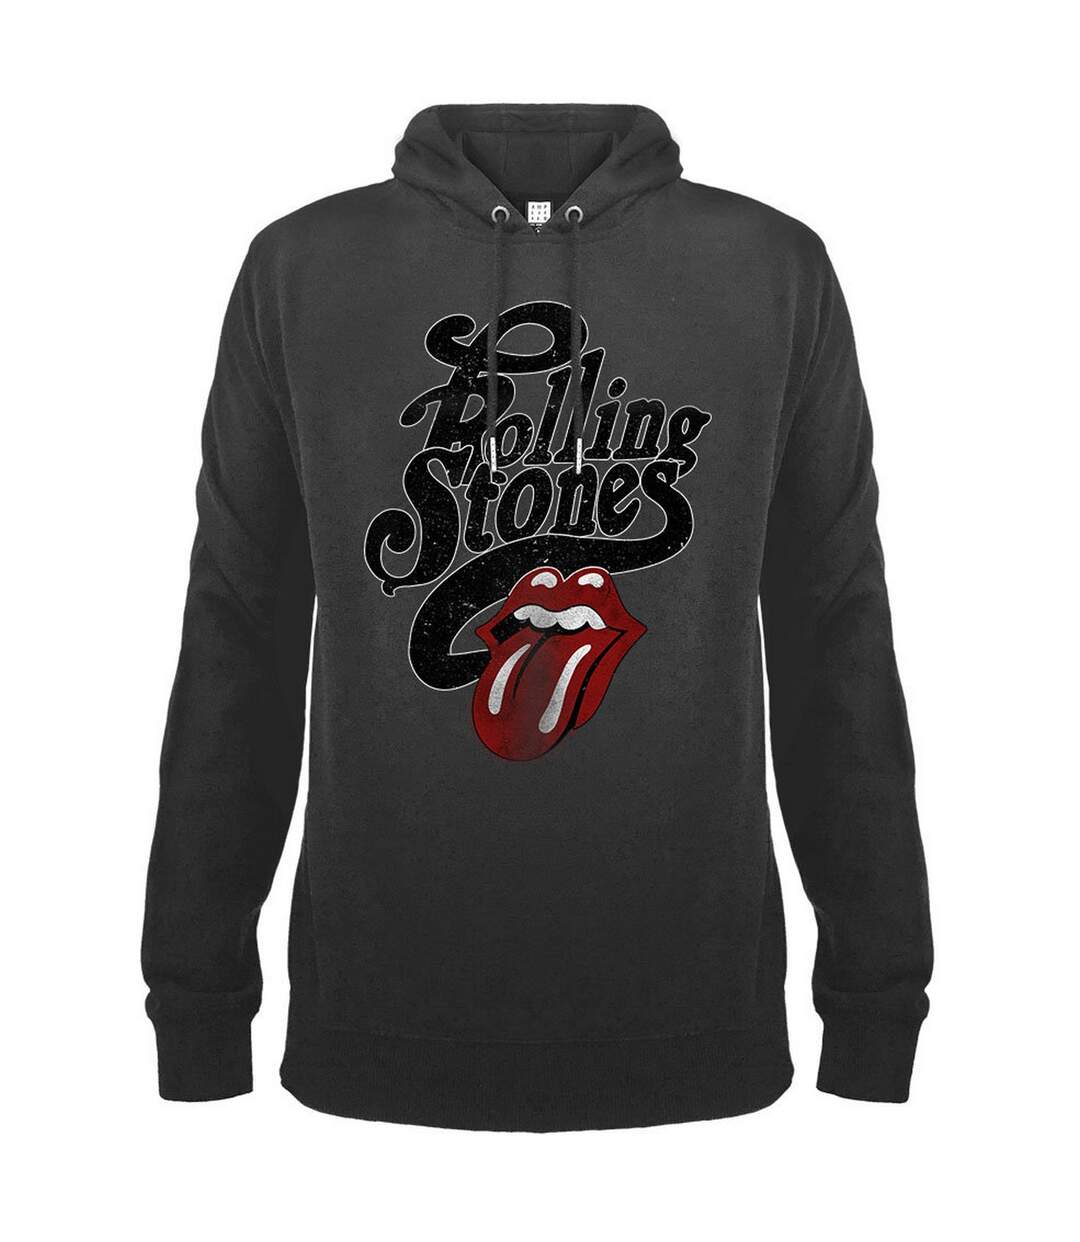 Amplified Unisex Adult Licked The Rolling Stones Hoodie (Slate)